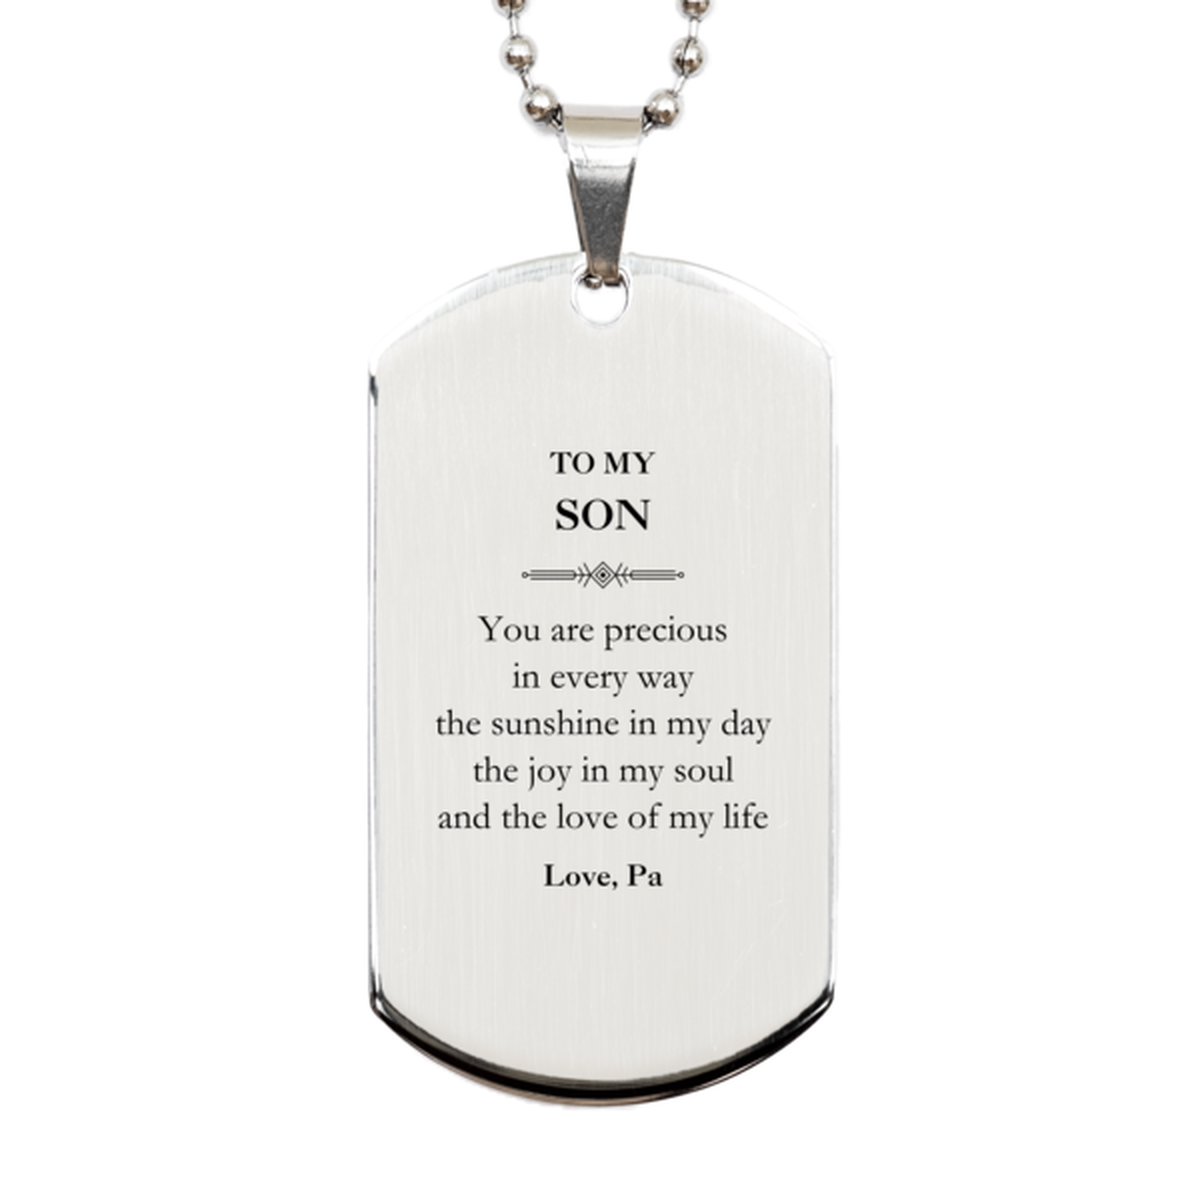 Graduation Gifts for Son Silver Dog Tag Present from Pa, Christmas Son Birthday Gifts Son You are precious in every way the sunshine in my day. Love, Pa